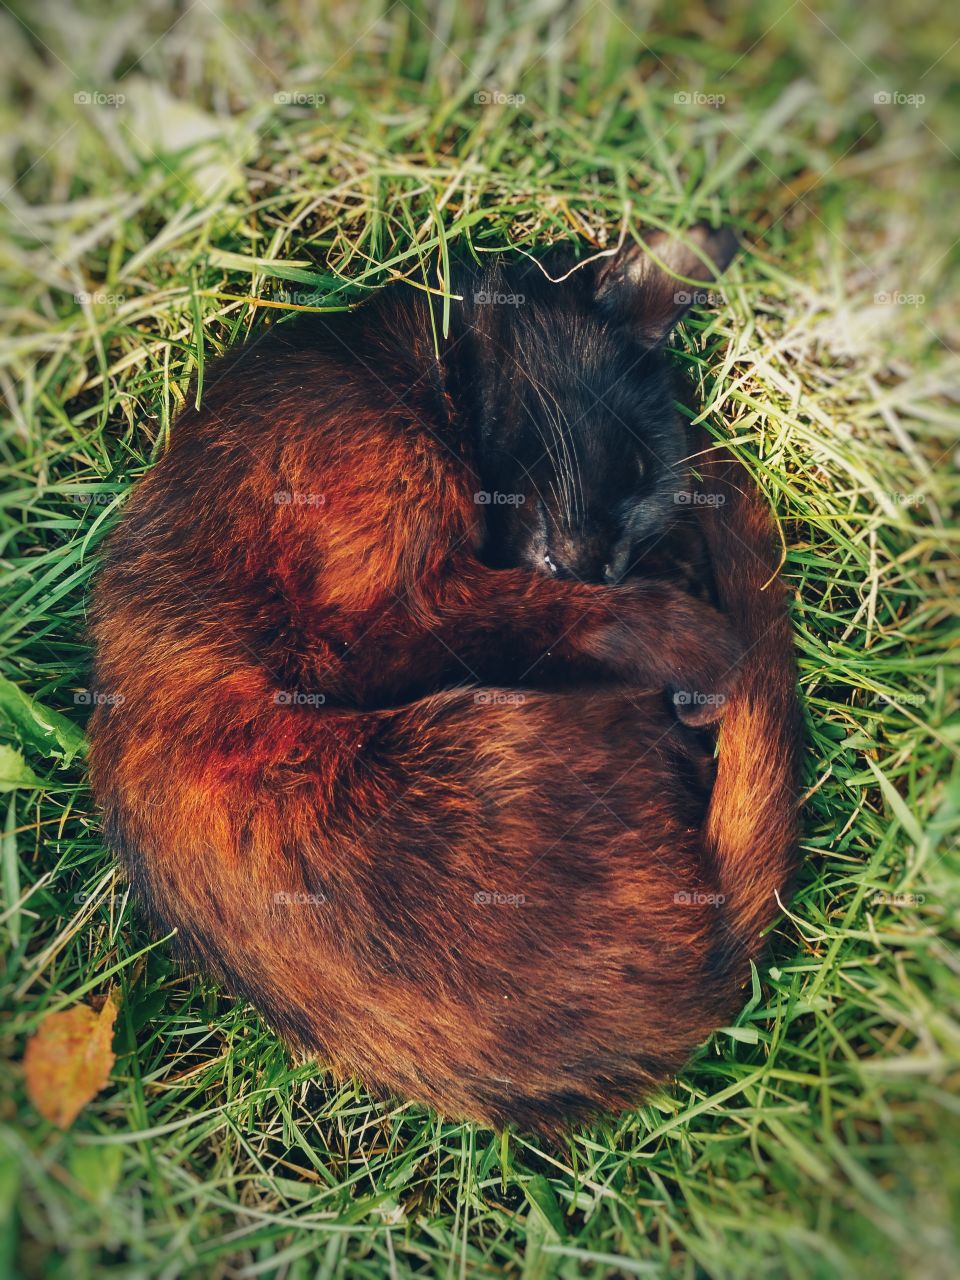 Cat sleeping in the grass